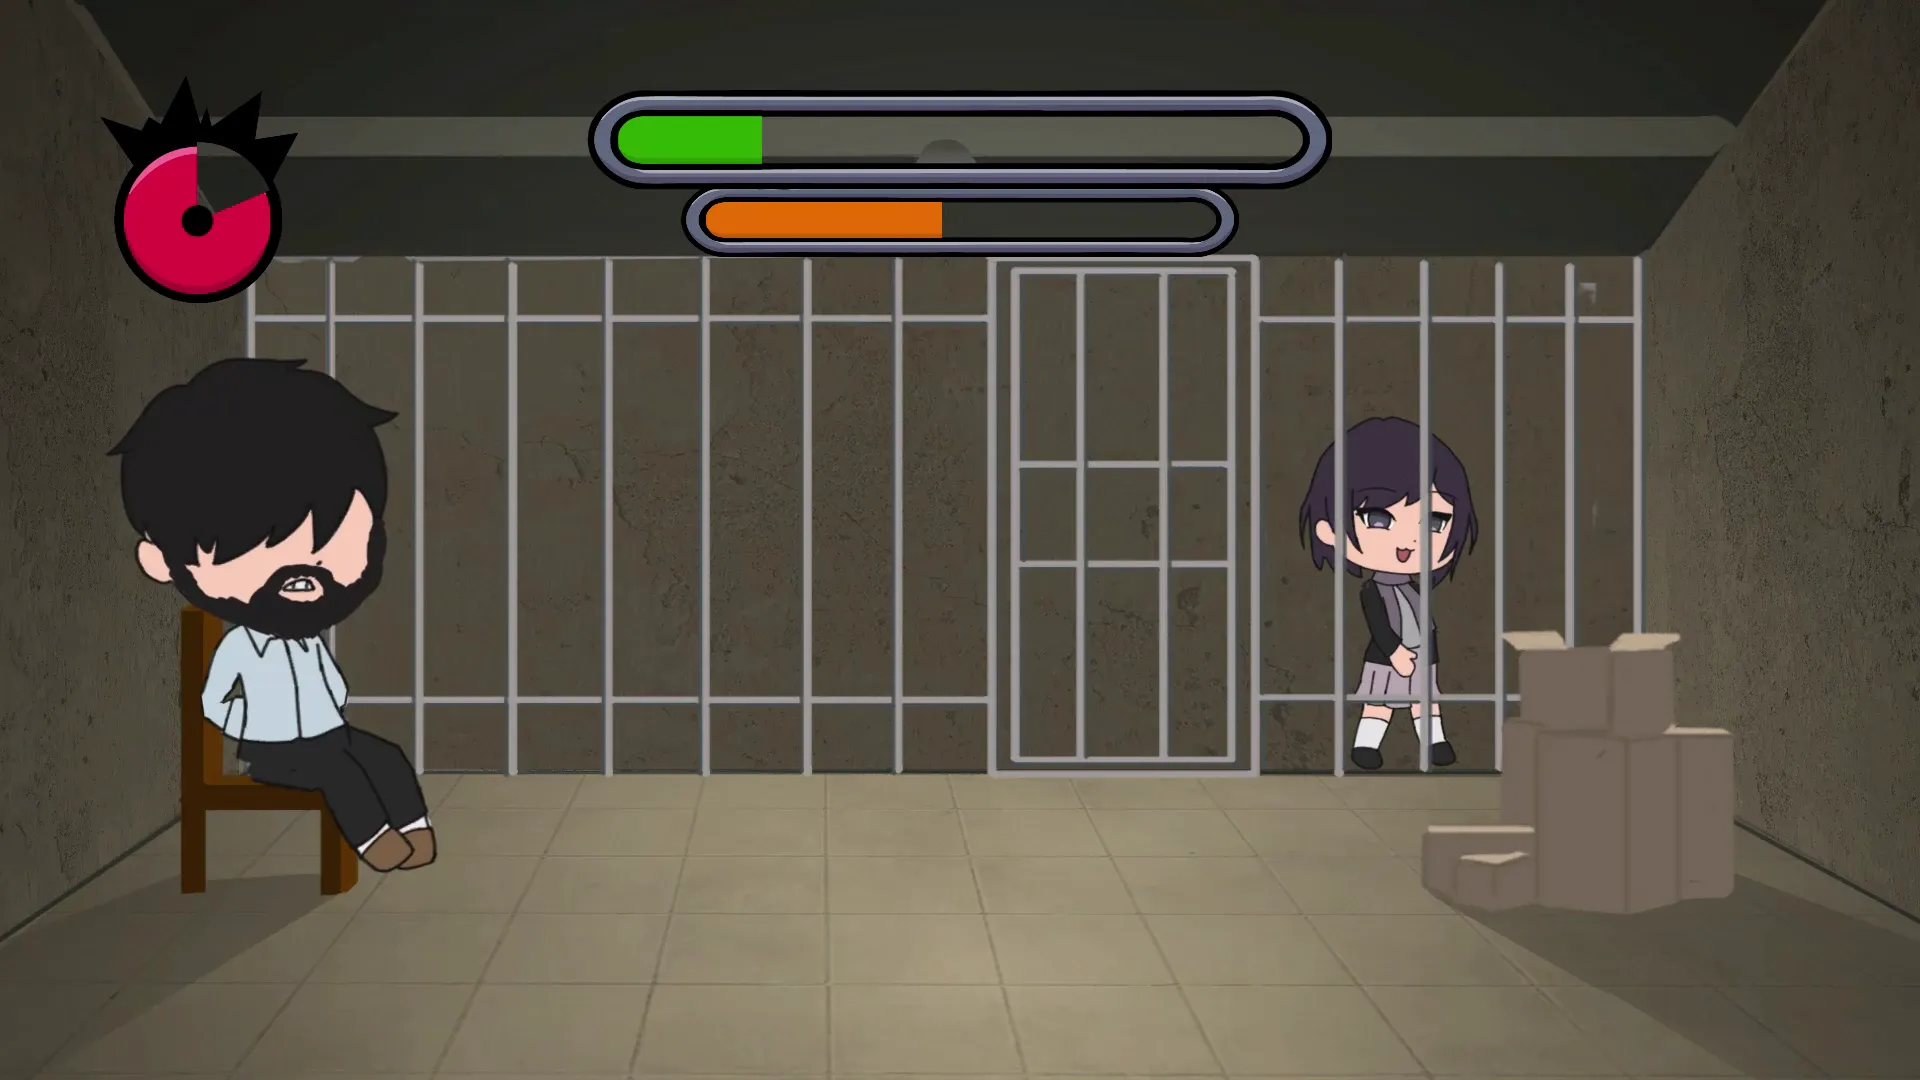 Date Escape Gameplay Preview where the player answer wrong and get older with their friend is checking on the player